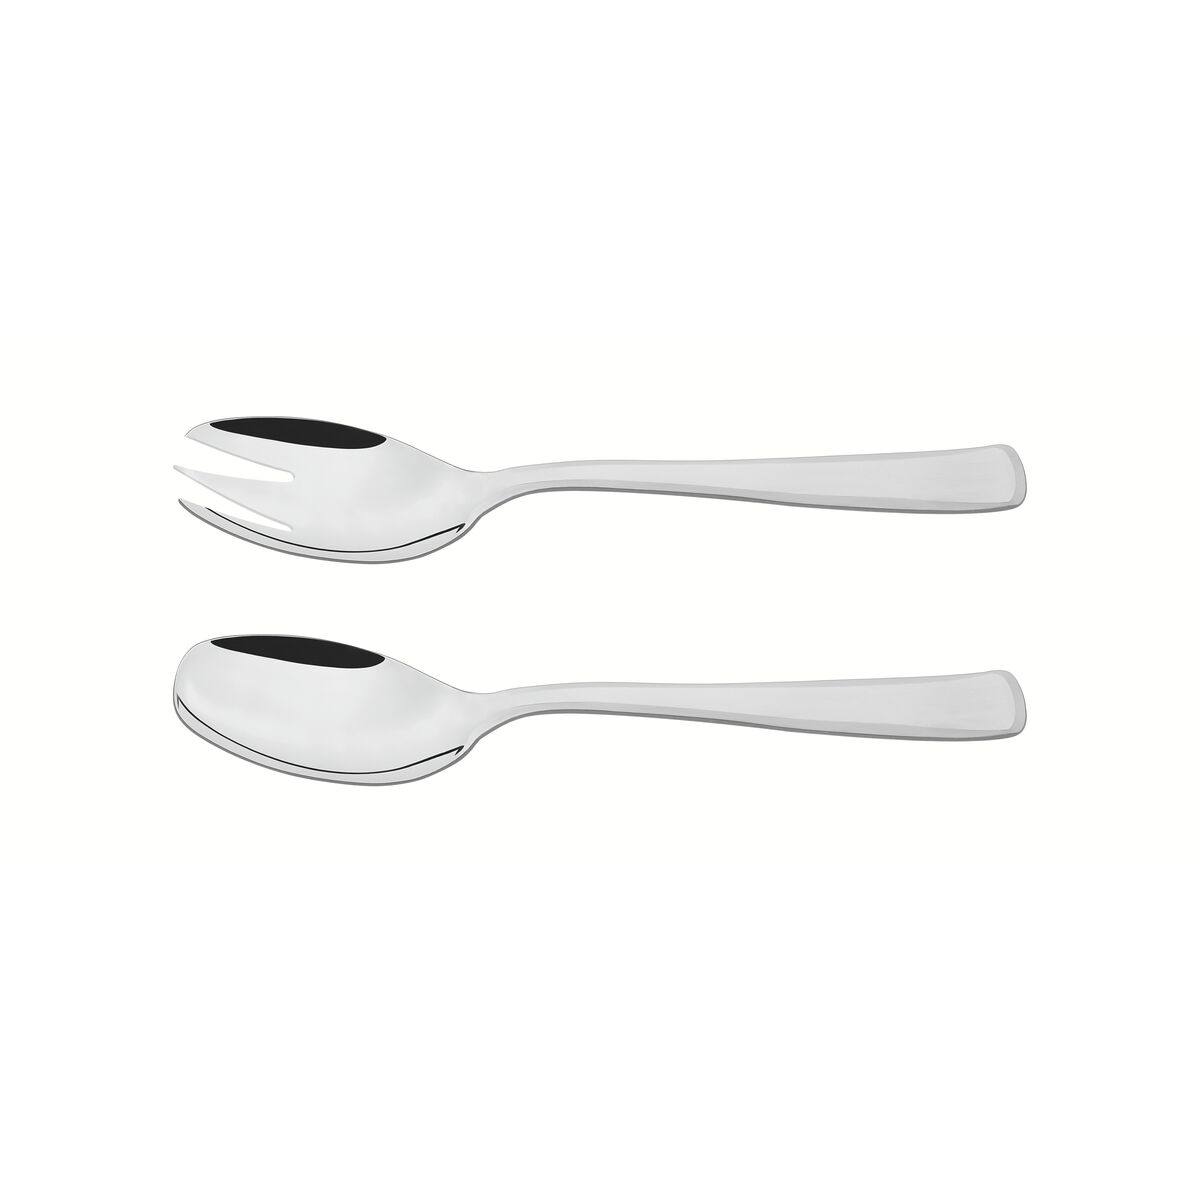 Tramontina Pacific stainless steel salad servers